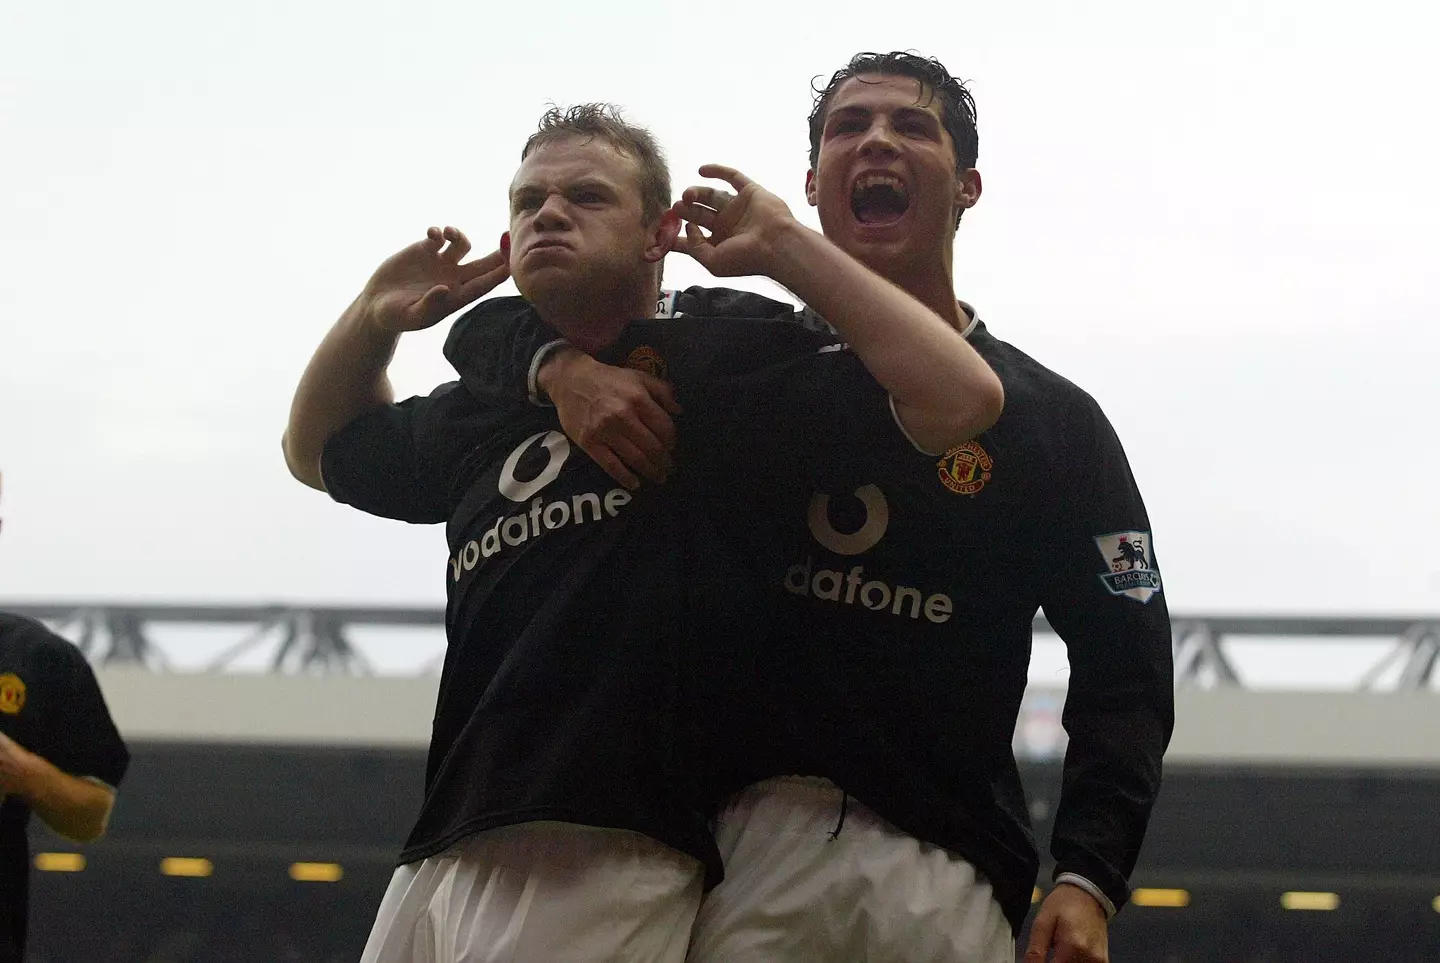 Rooney and Ronaldo were close during their time at Old Trafford. (Image